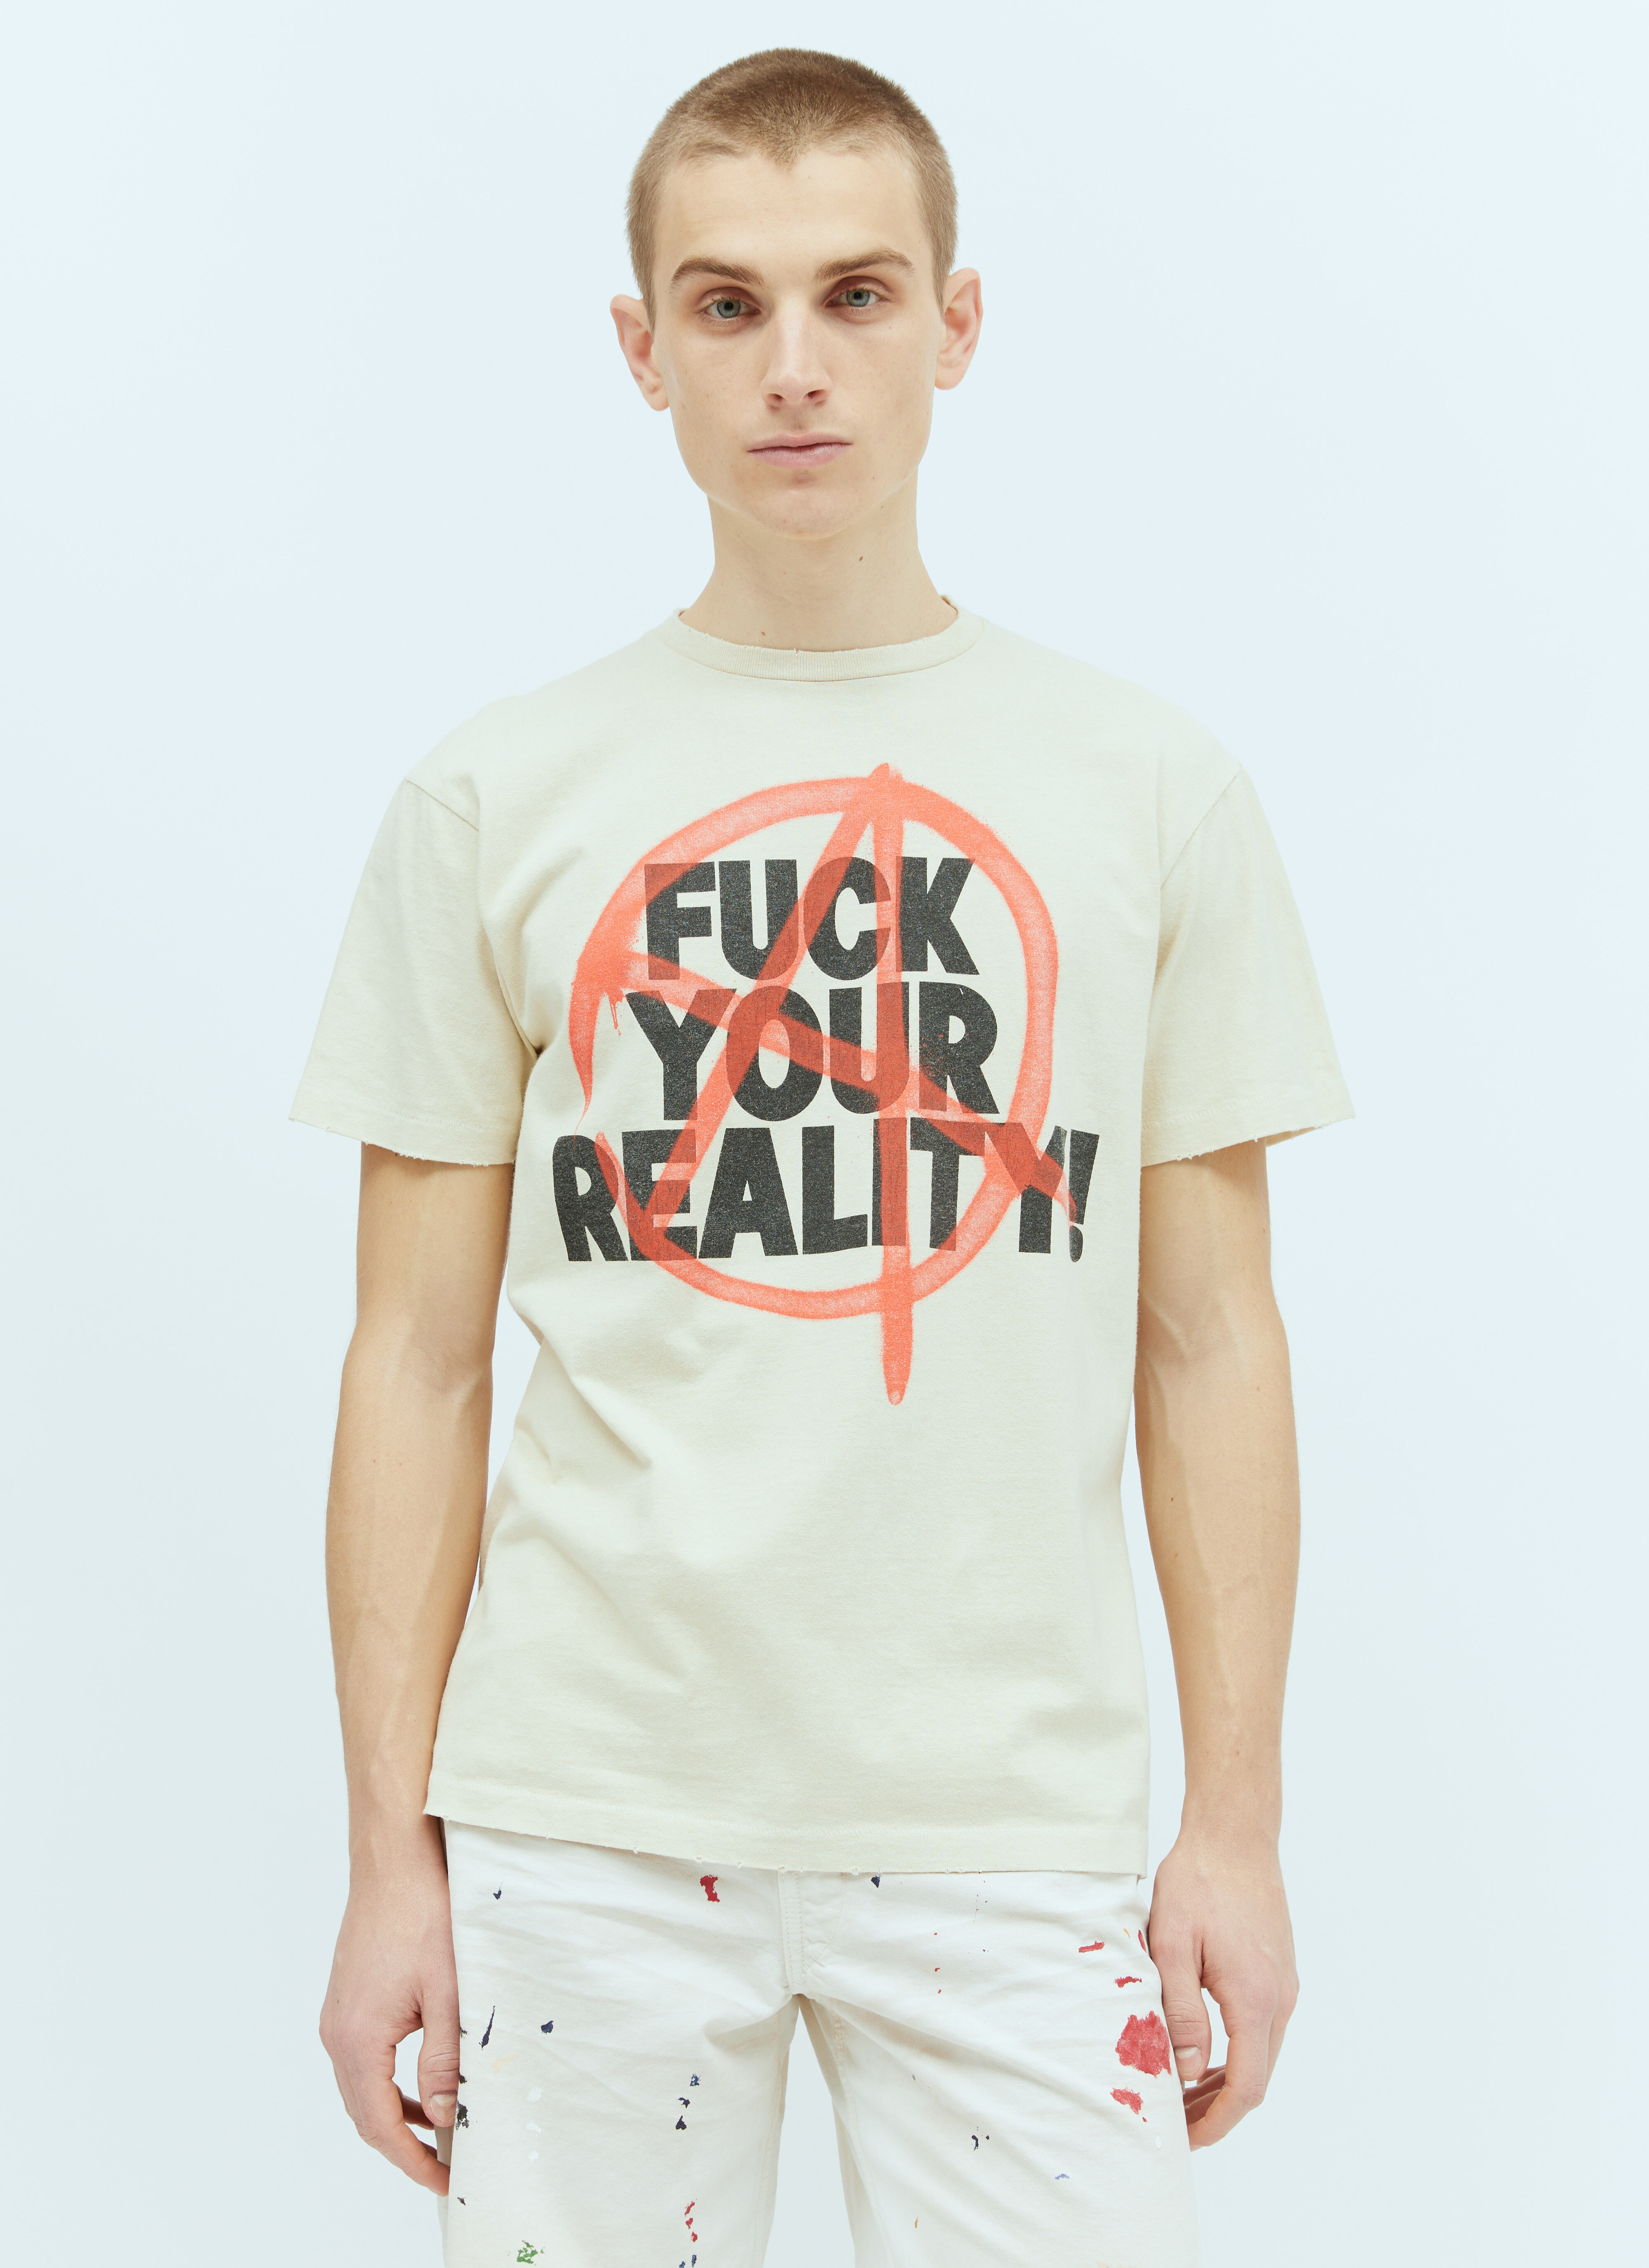 Gallery Dept. Fuck Your Reality Tシャツ ホワイト gdp0153039